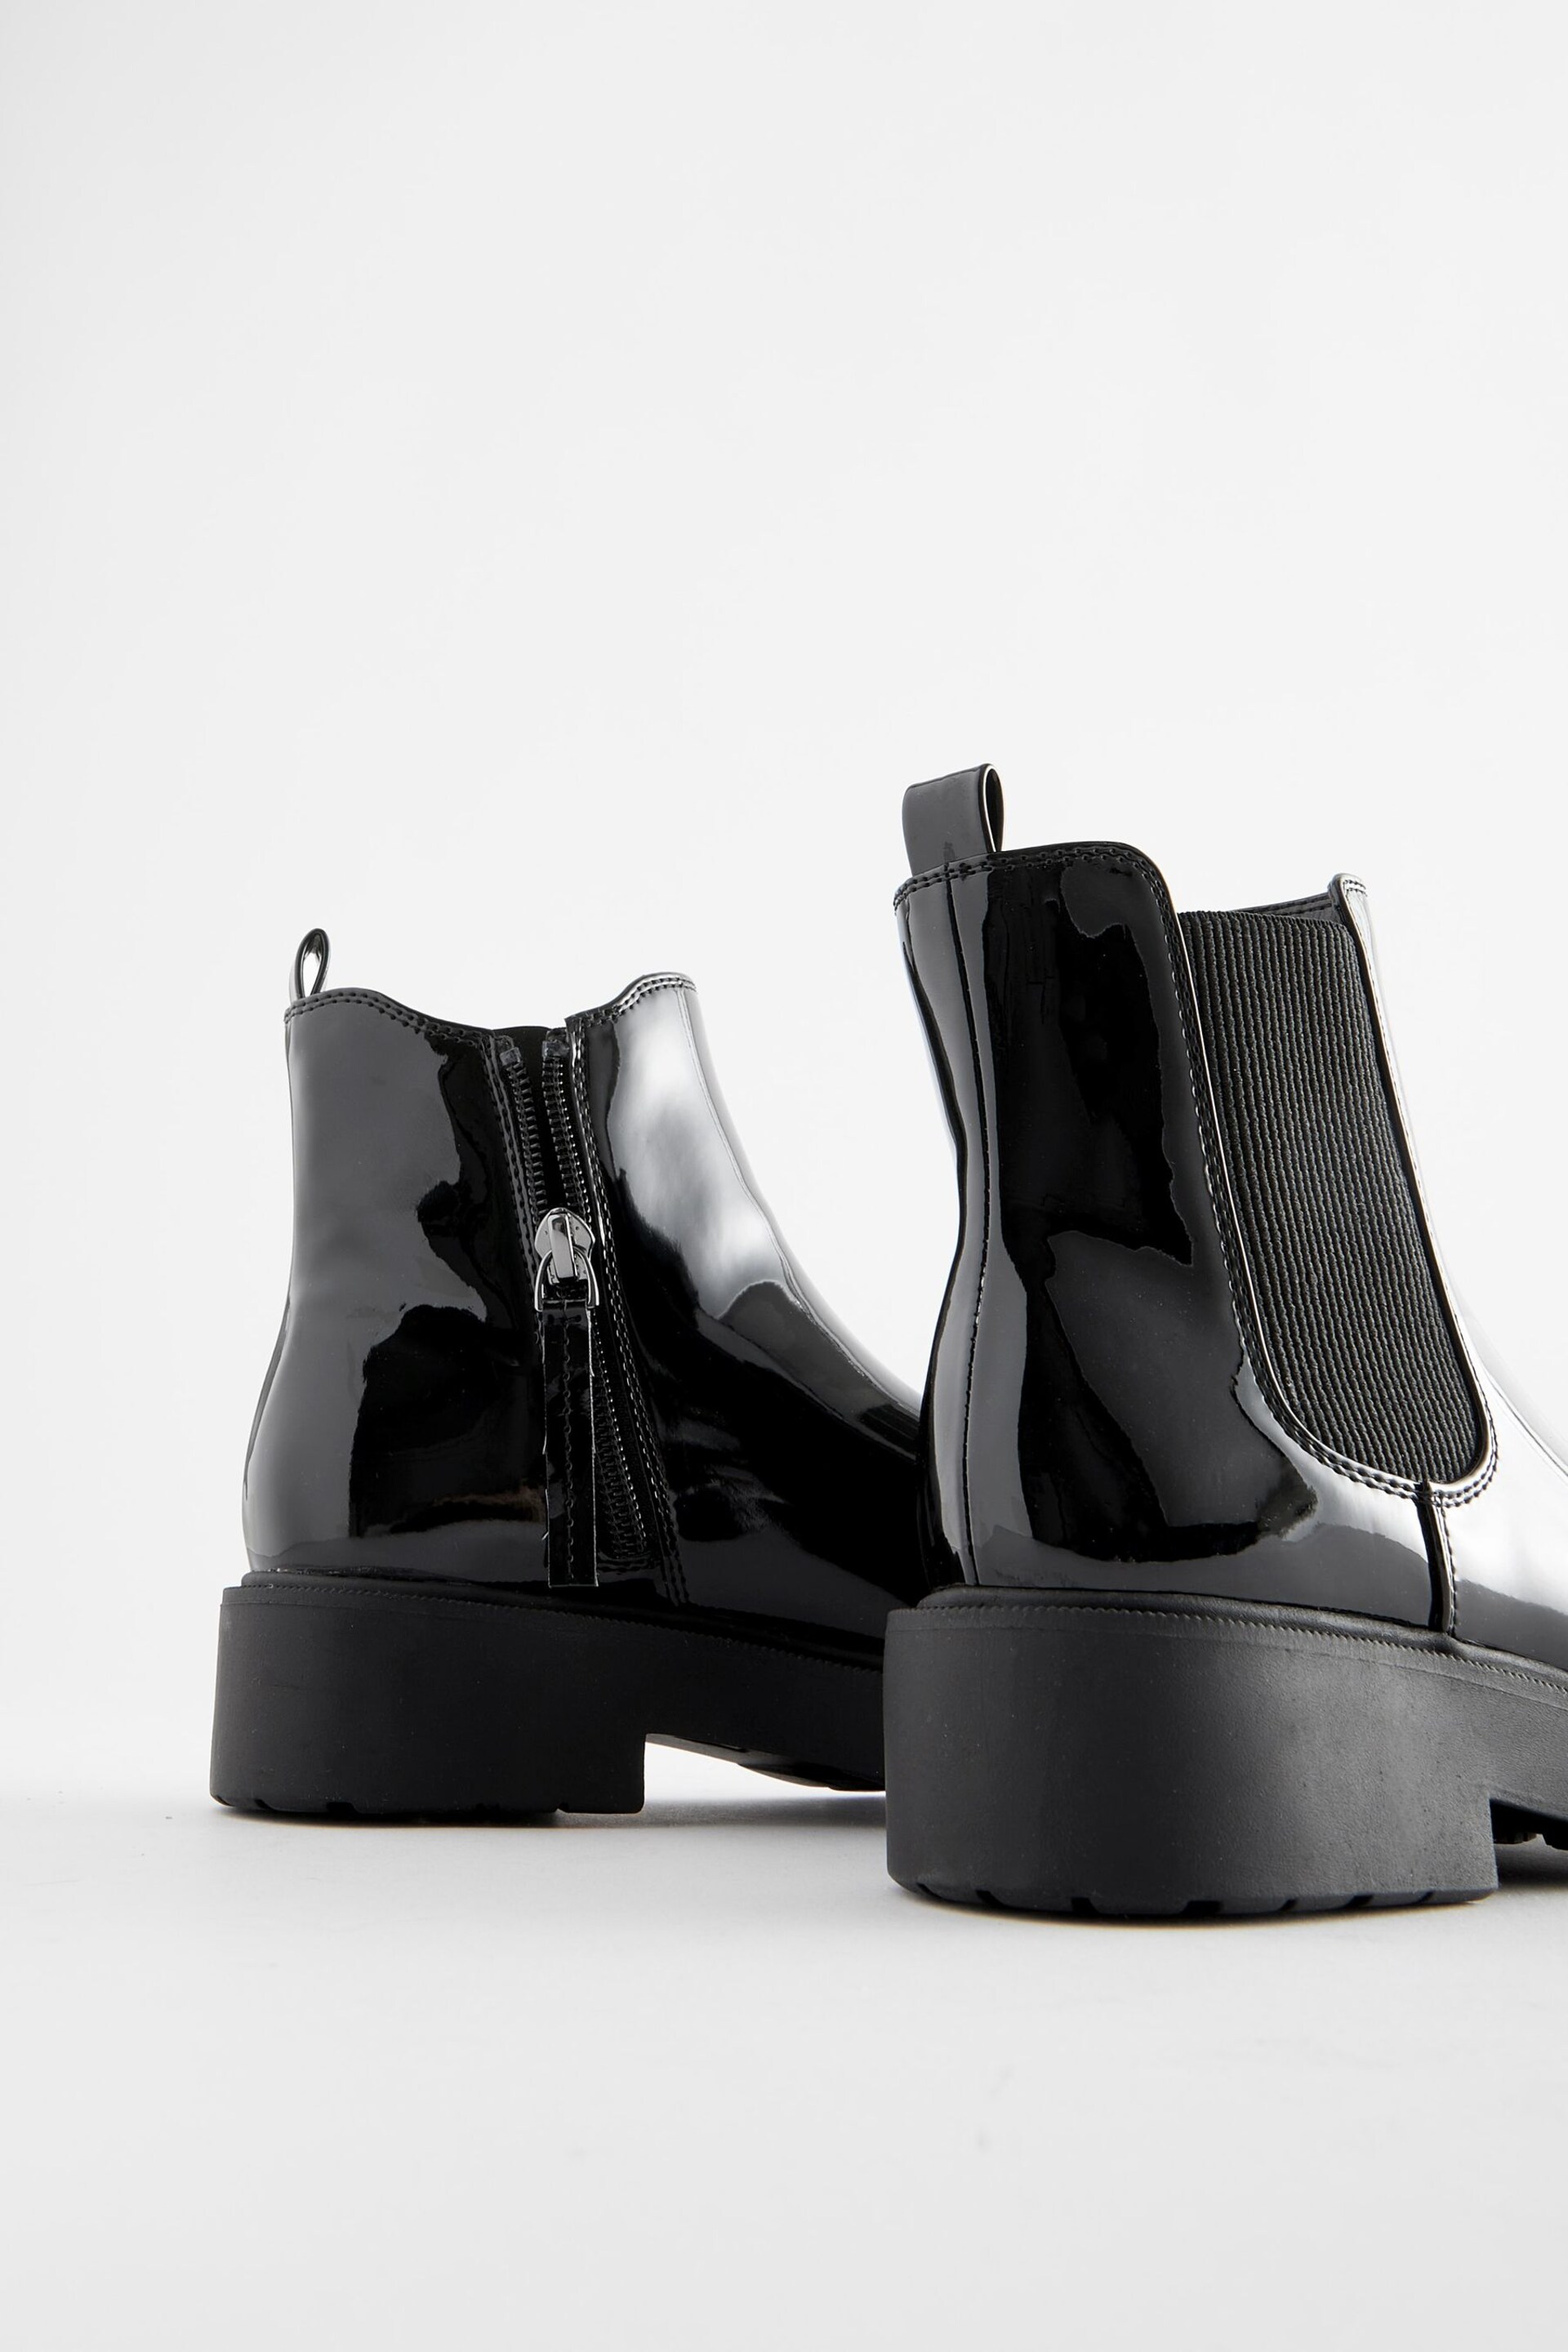 Black Patent Wide Fit (G) Chunky Chelsea Boots - Image 4 of 5